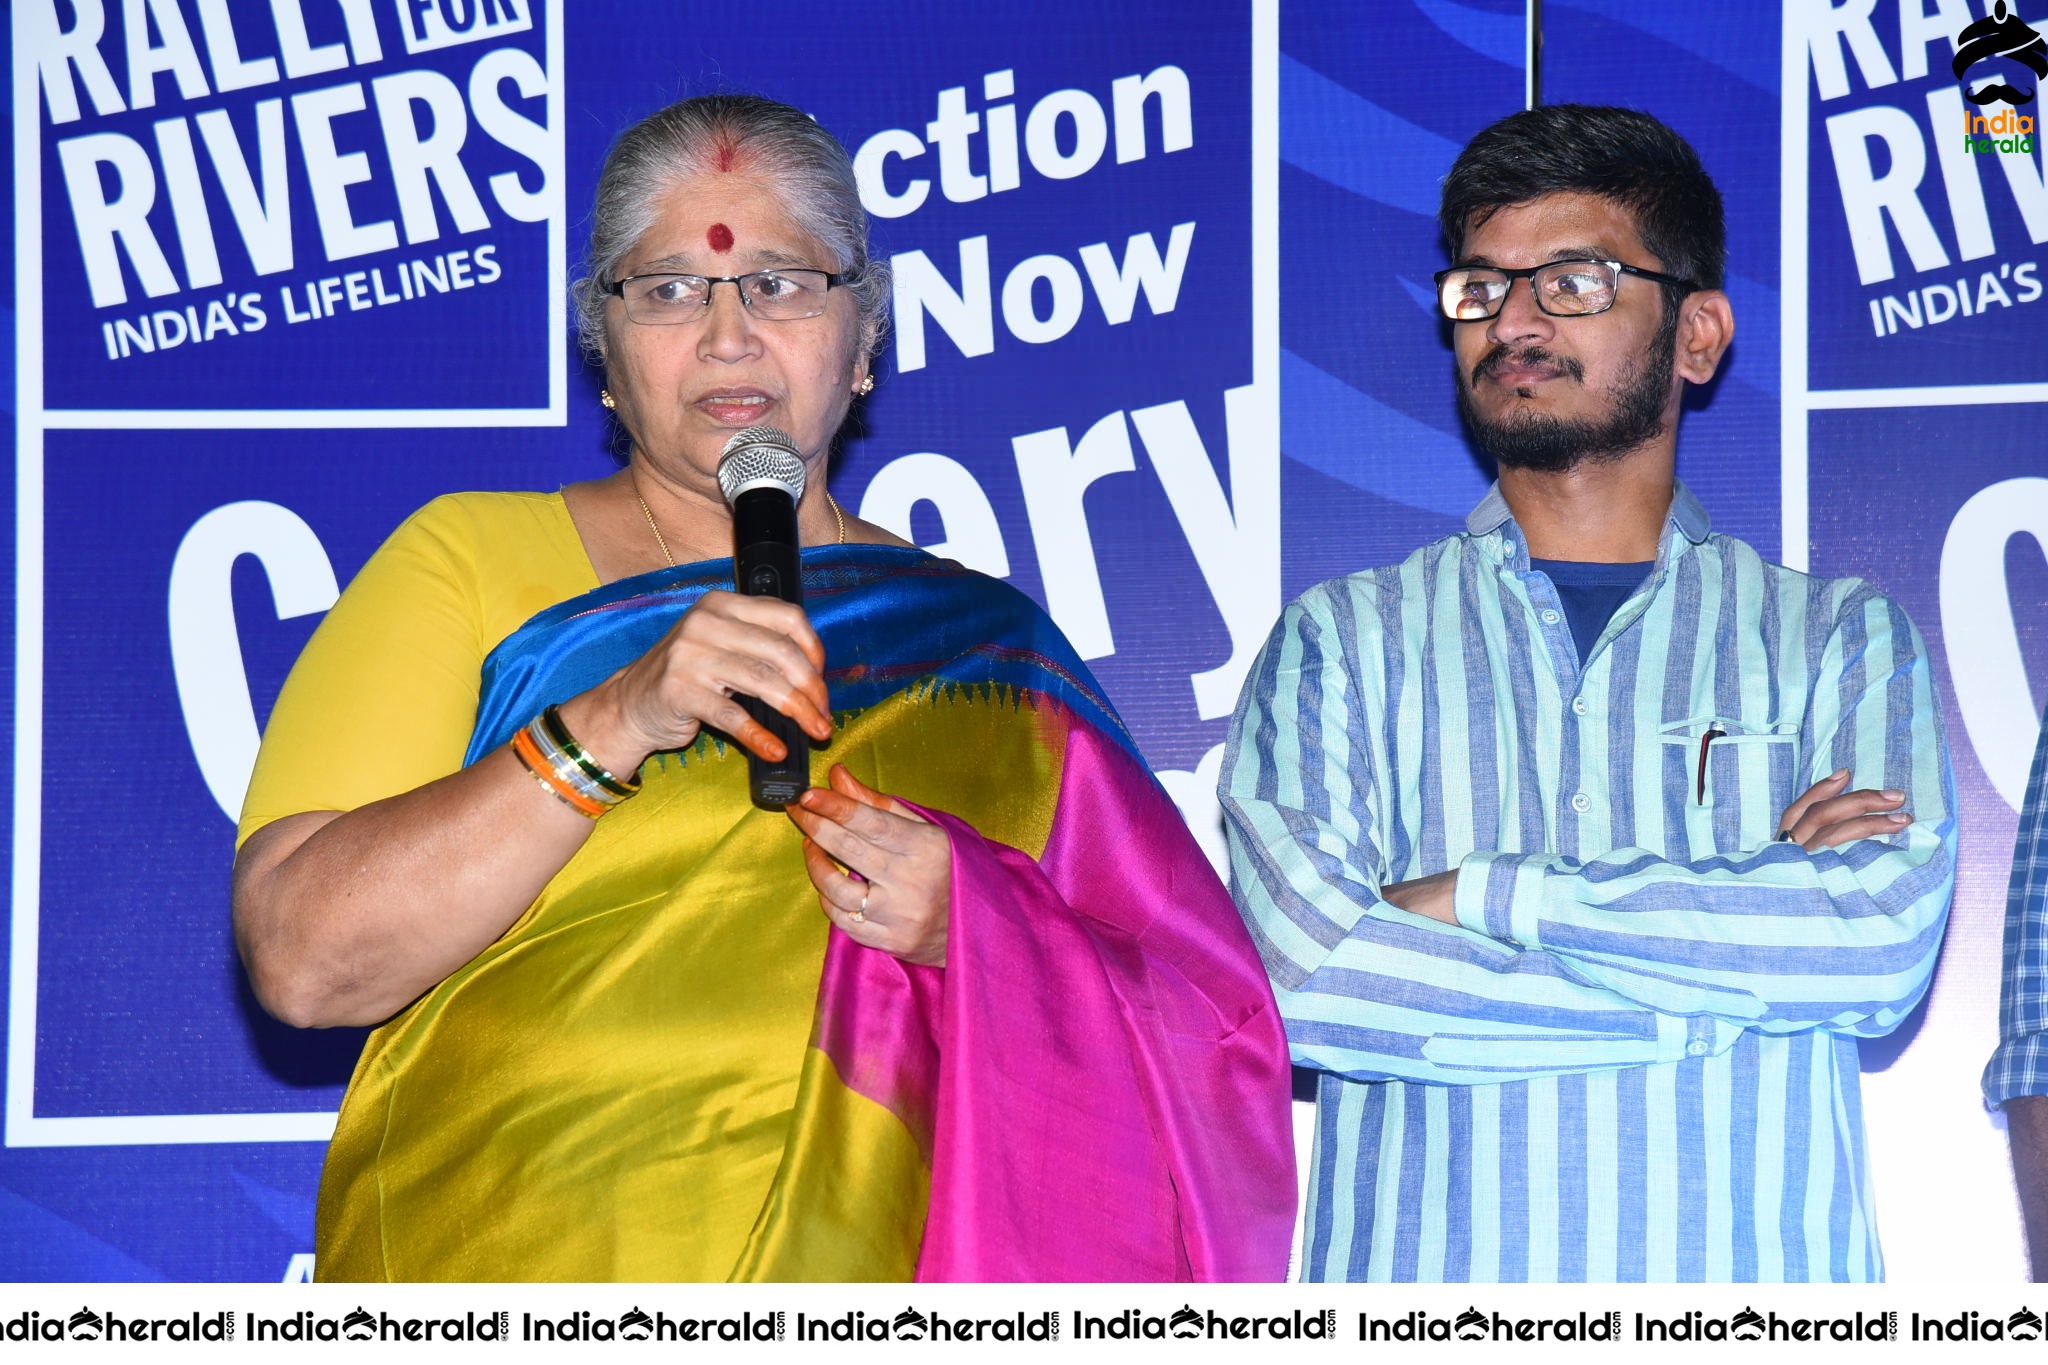 Pop Singer Smita Rally for Rivers Song Launch Set 4